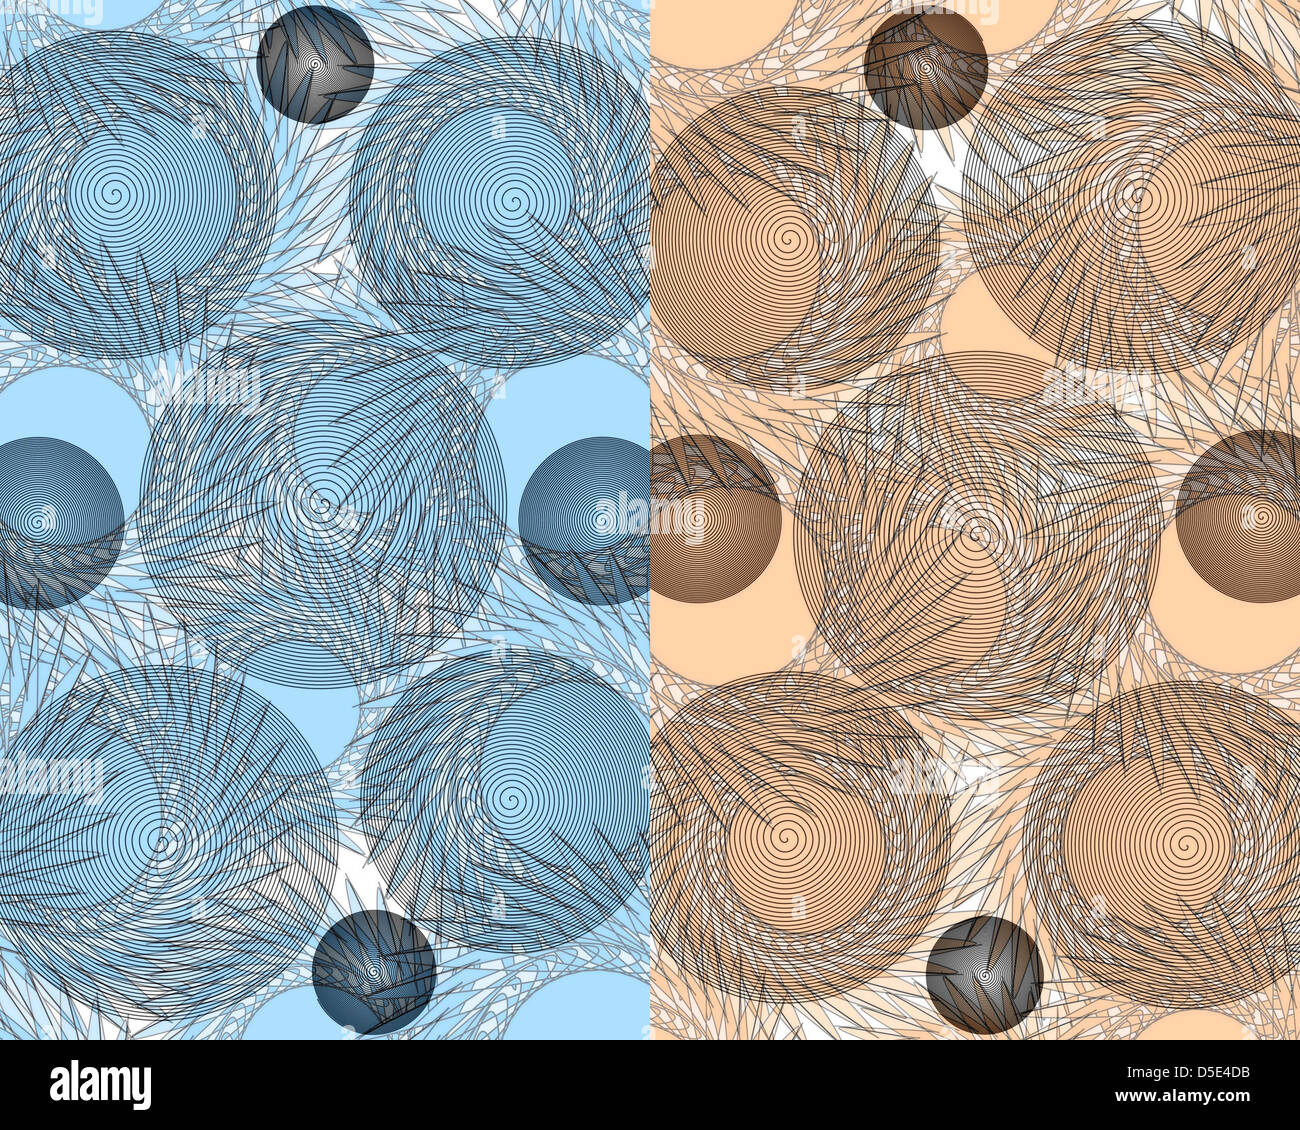 Graceful colourful modern abstract design in  two picture format  using geometric motifs superimposed over floral  pale blue and orange . Stock Photo